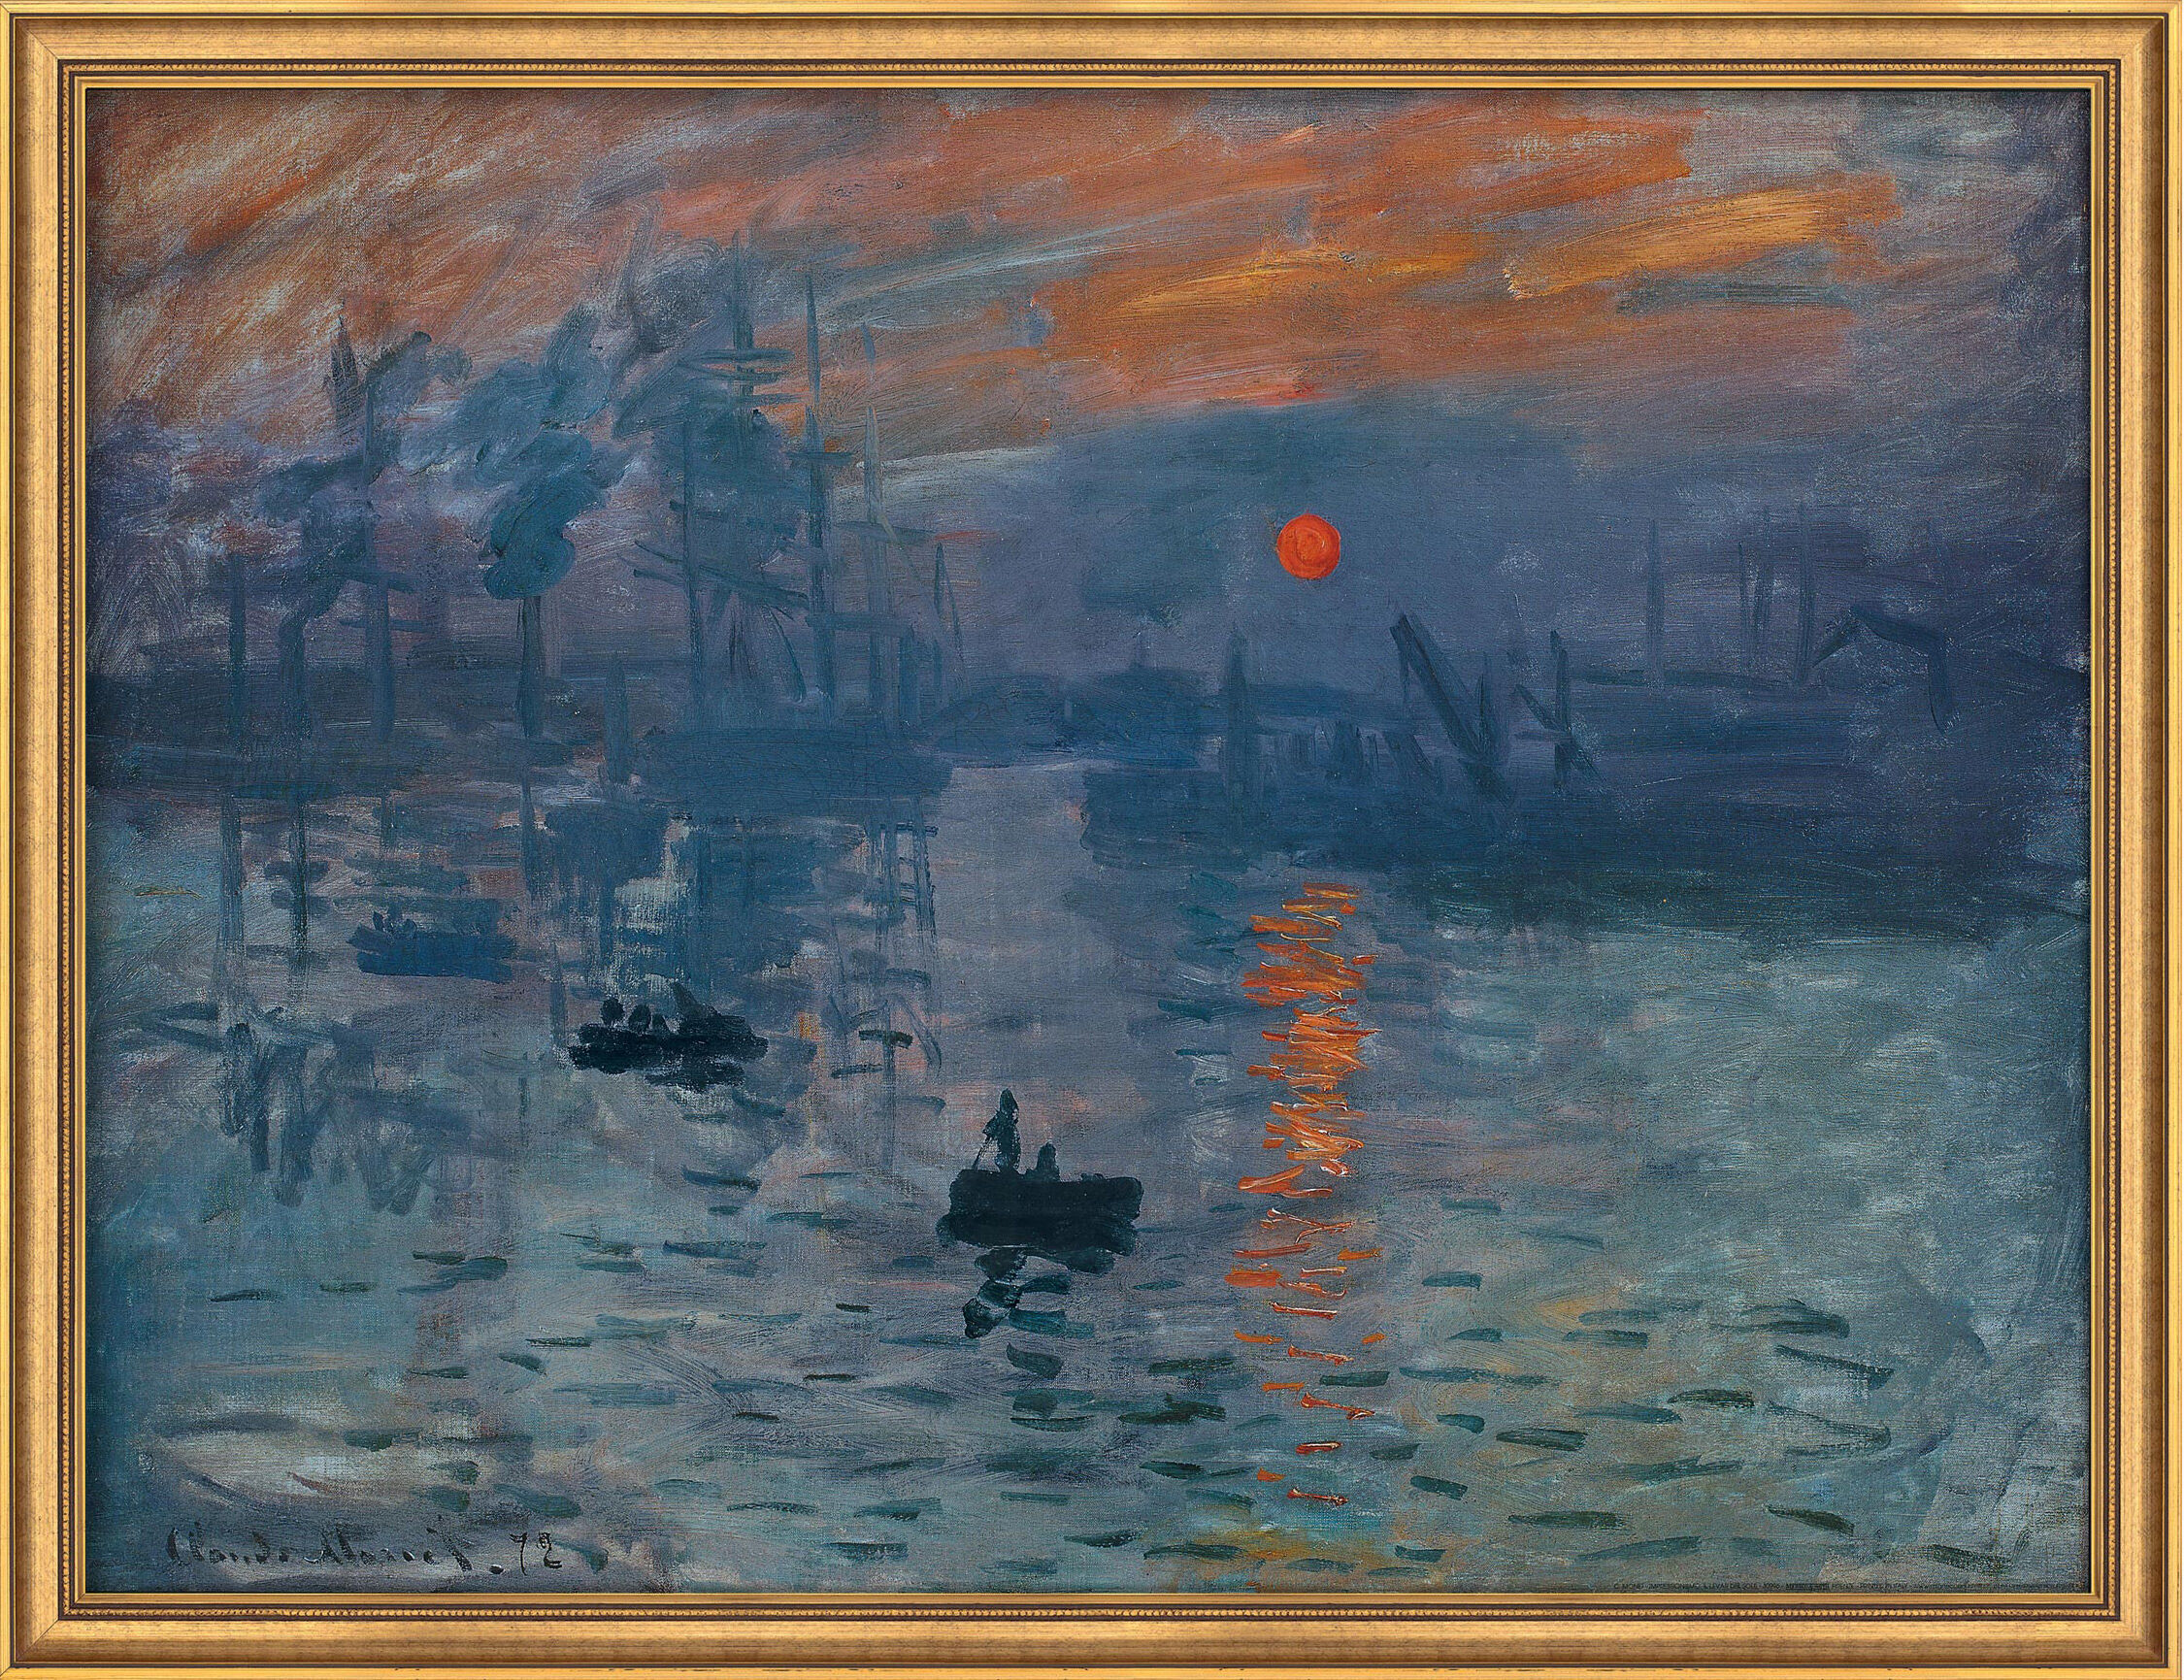 Picture "Impression, Sunrise" (1873), framed by Claude Monet